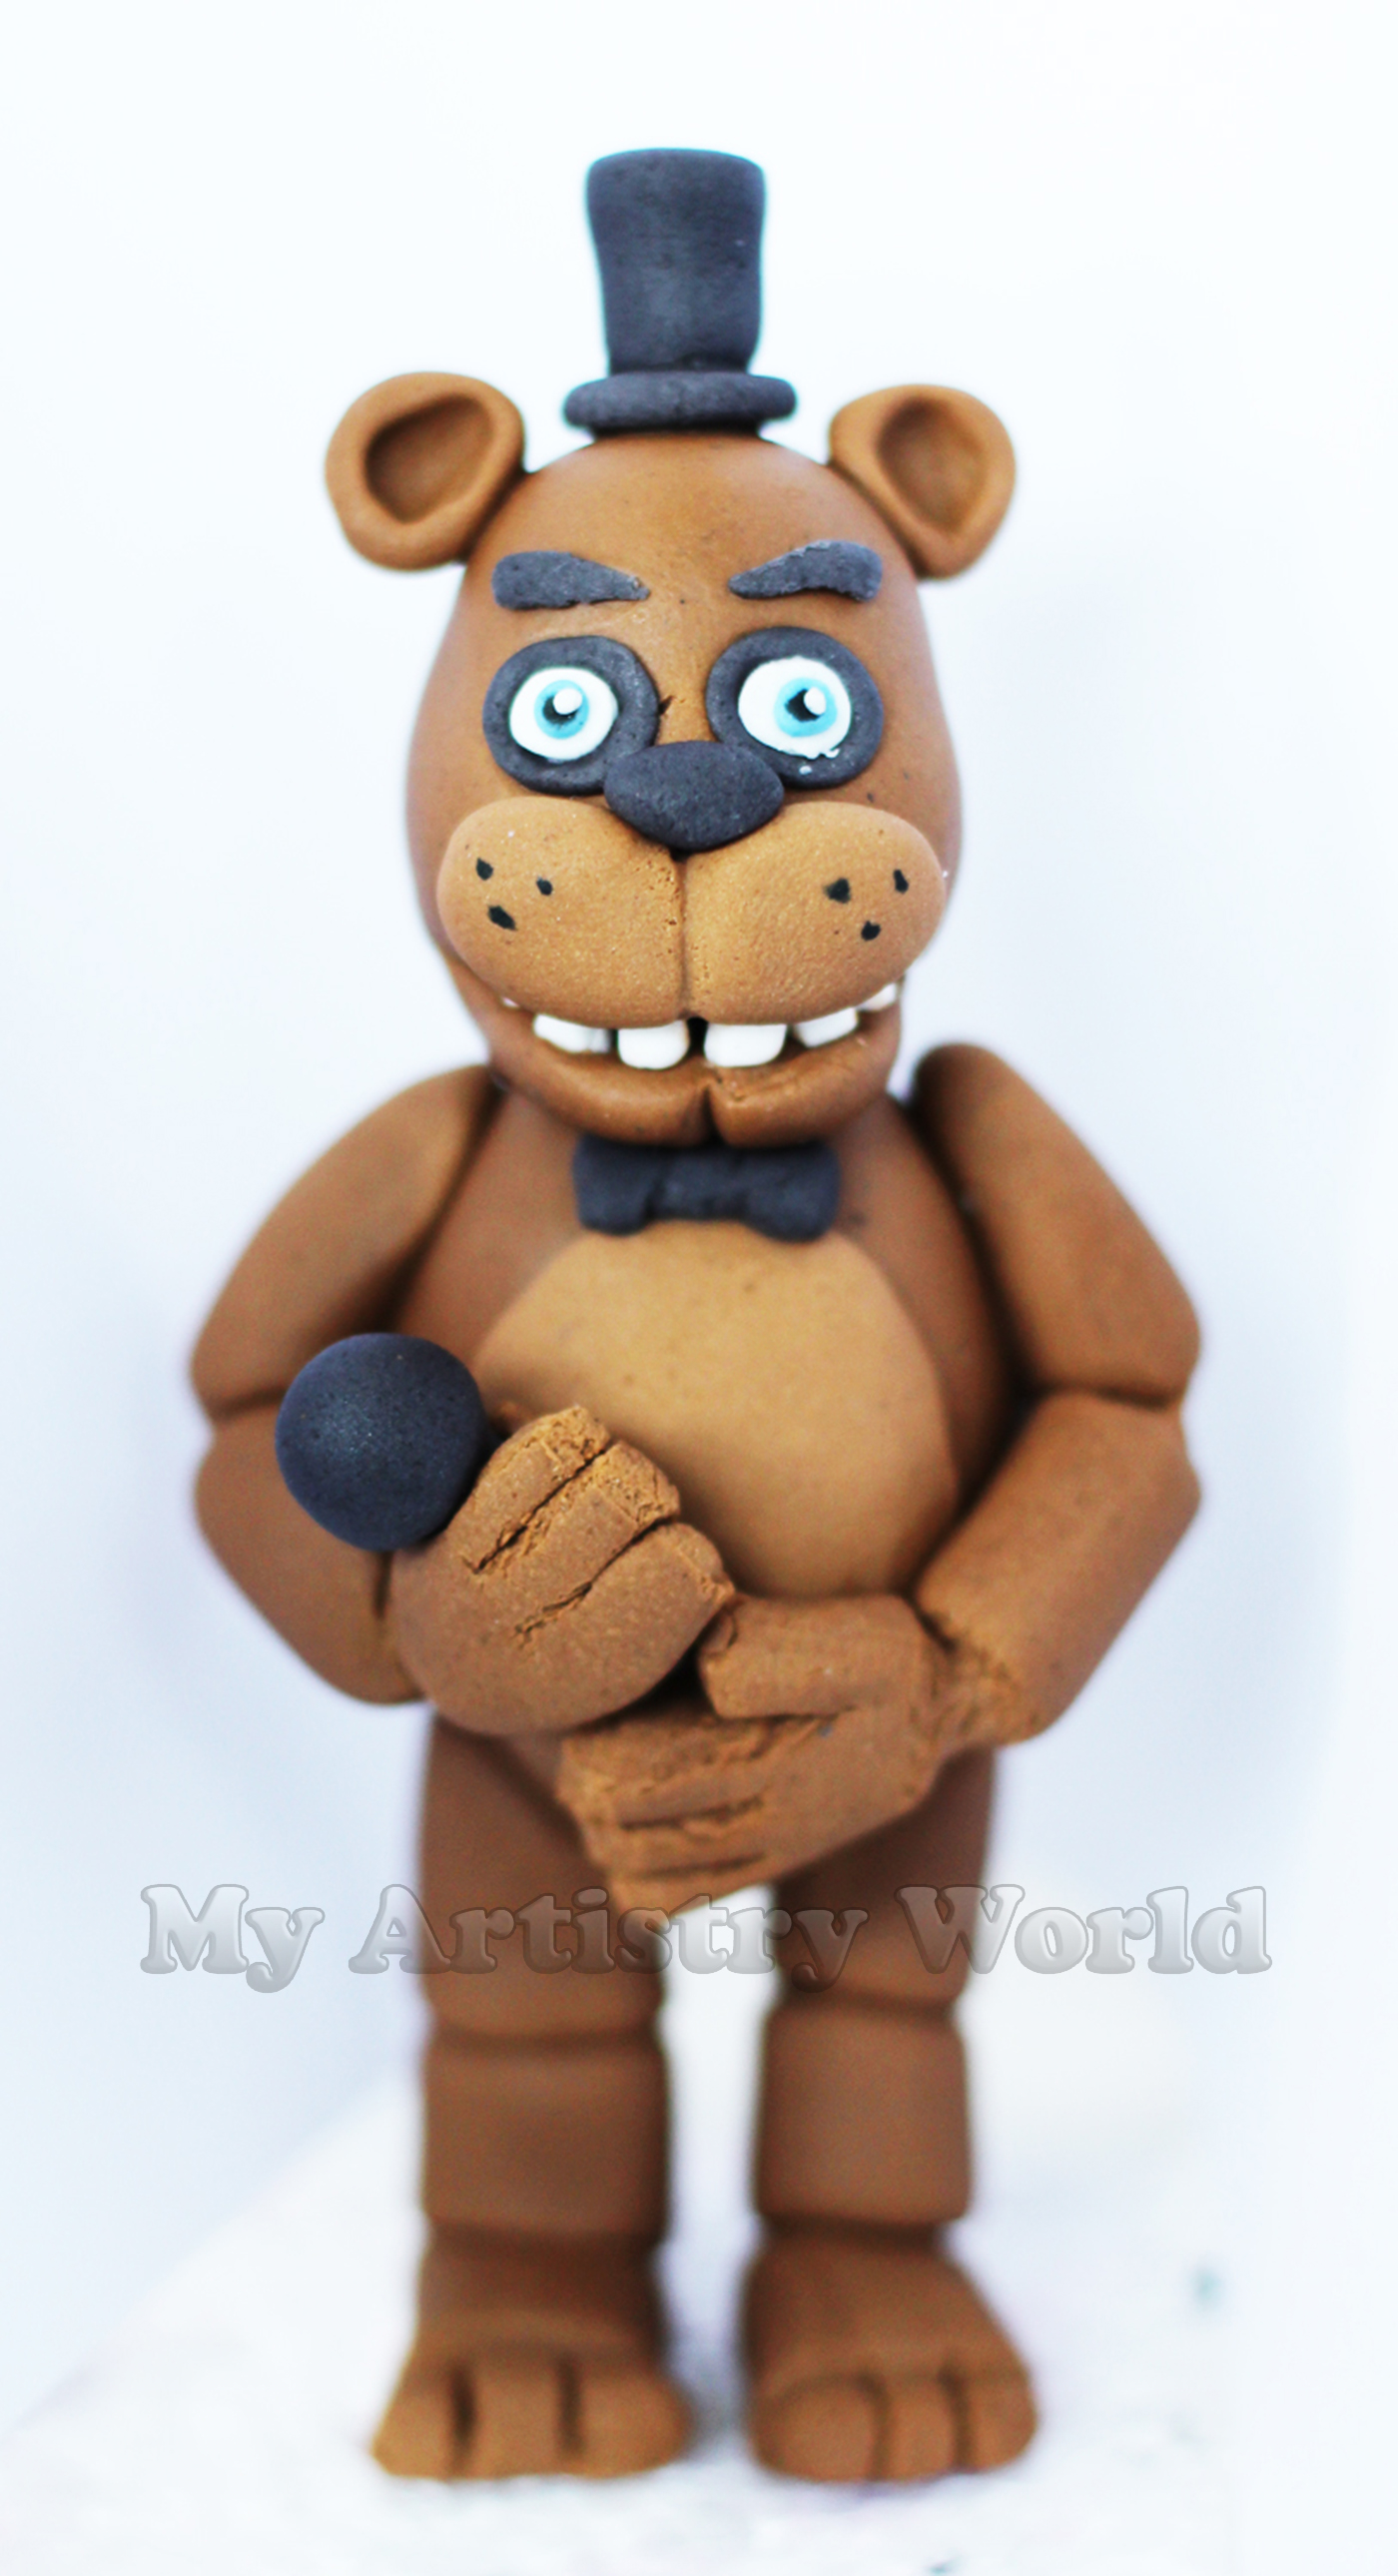 Five Nights At Freddy's Edible Image Cake Topper Personalized